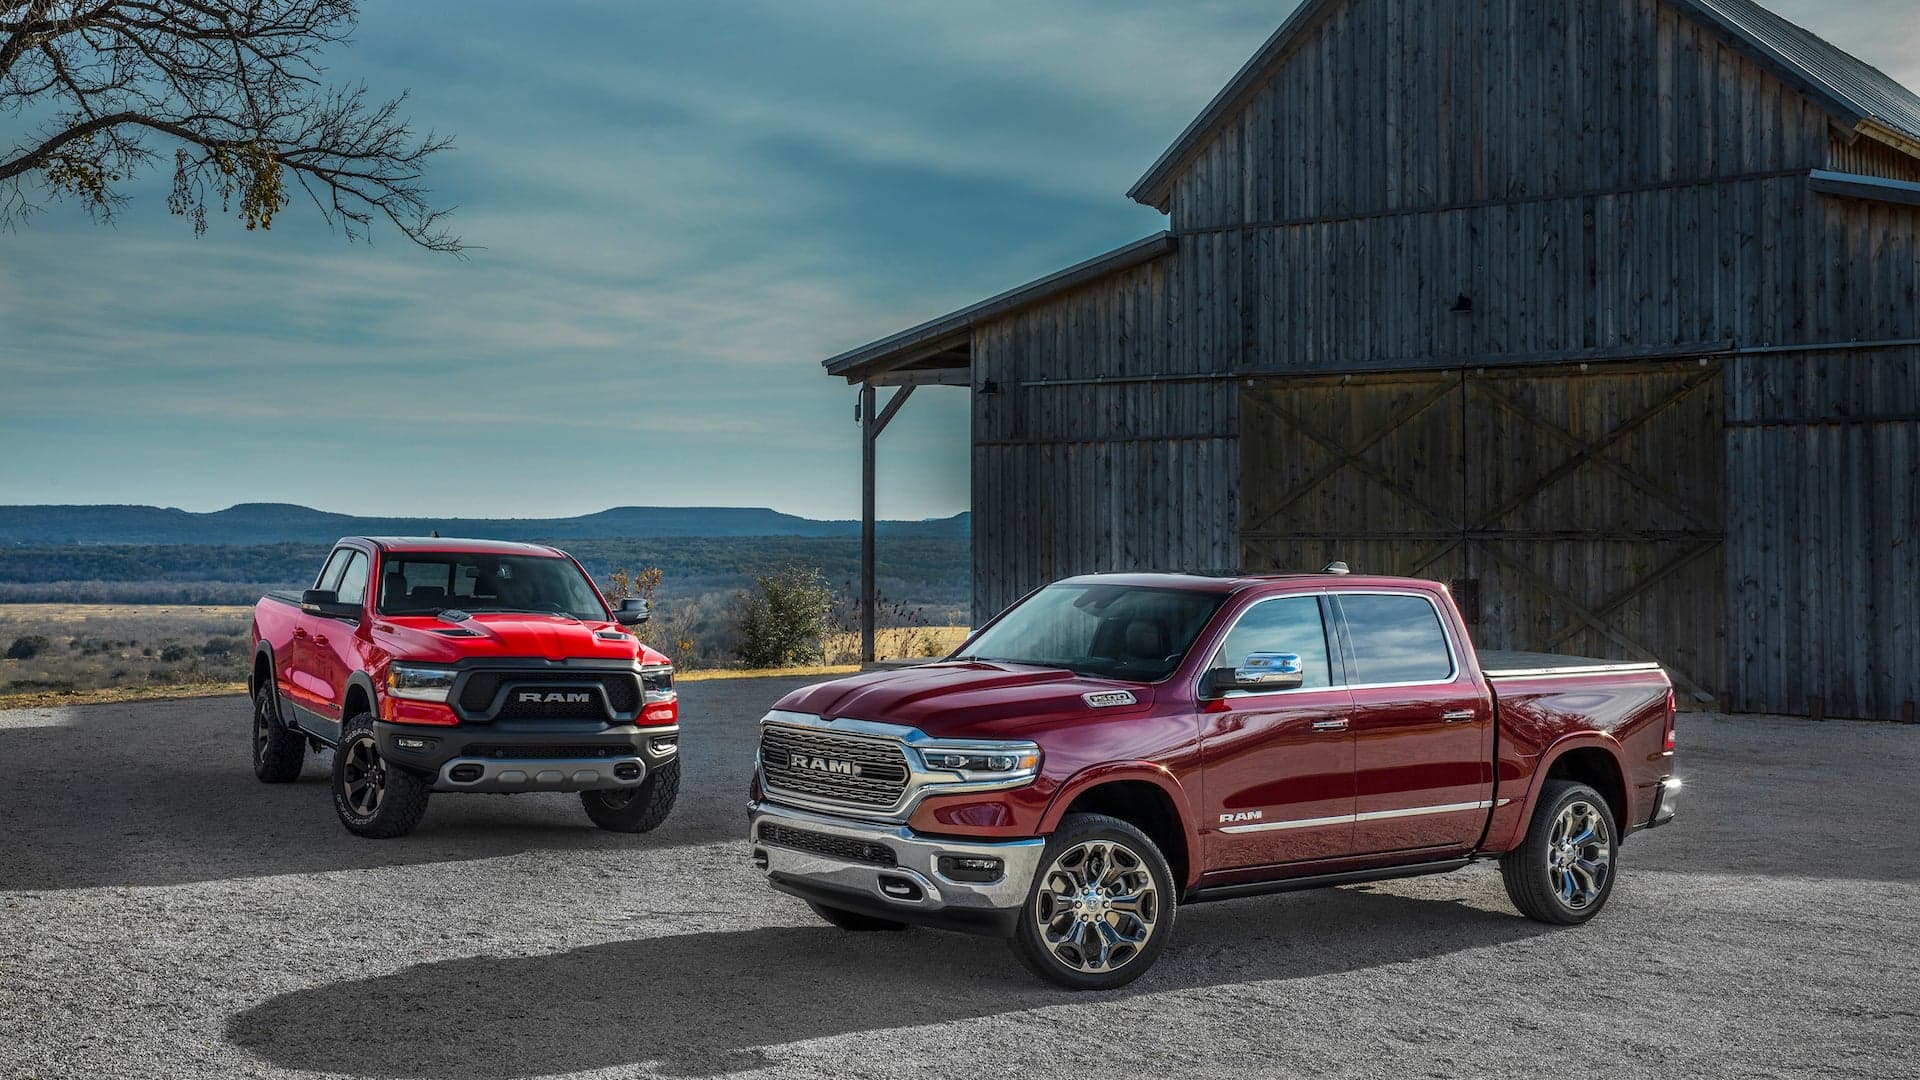 Several New Pickup Trucks Reportedly Stolen from Fiat Chrysler Michigan Plant